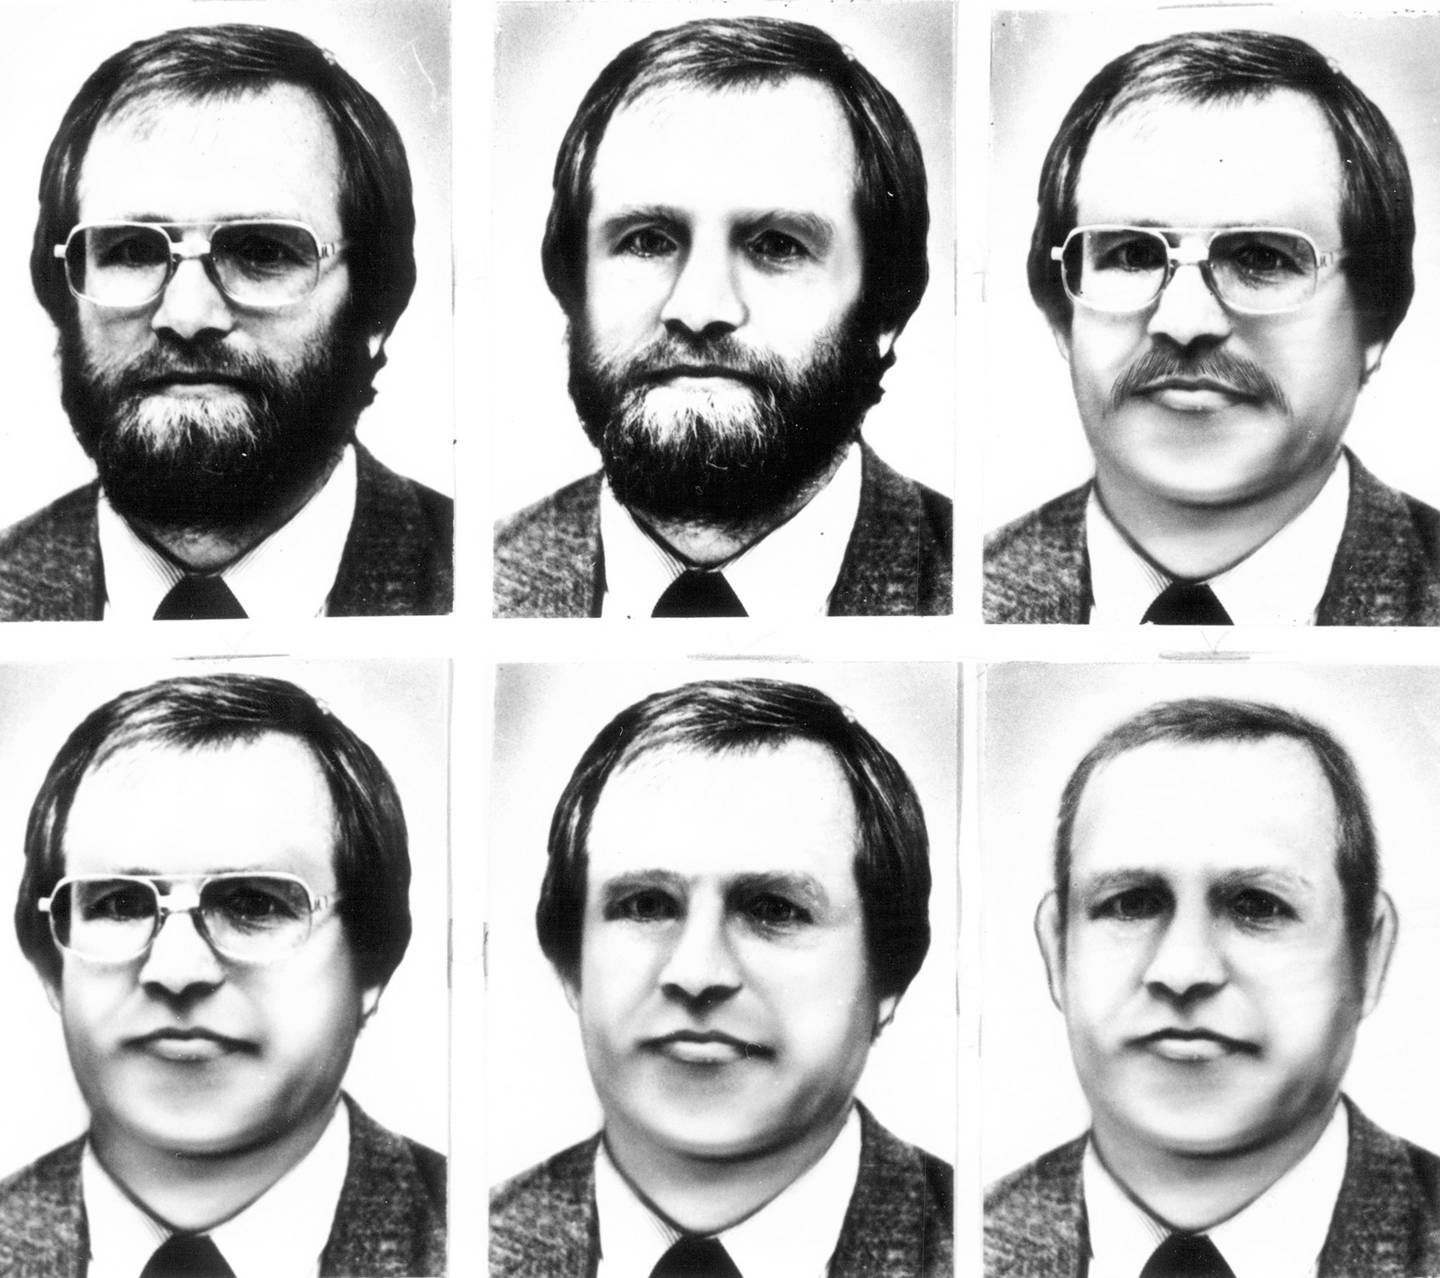 At top left is a photo of James Lewis from the time he was using the name Robert Richardson. Authorities distributed illustrations based on the photo that showed how he might have looked with and without glasses and with and without facial hair.